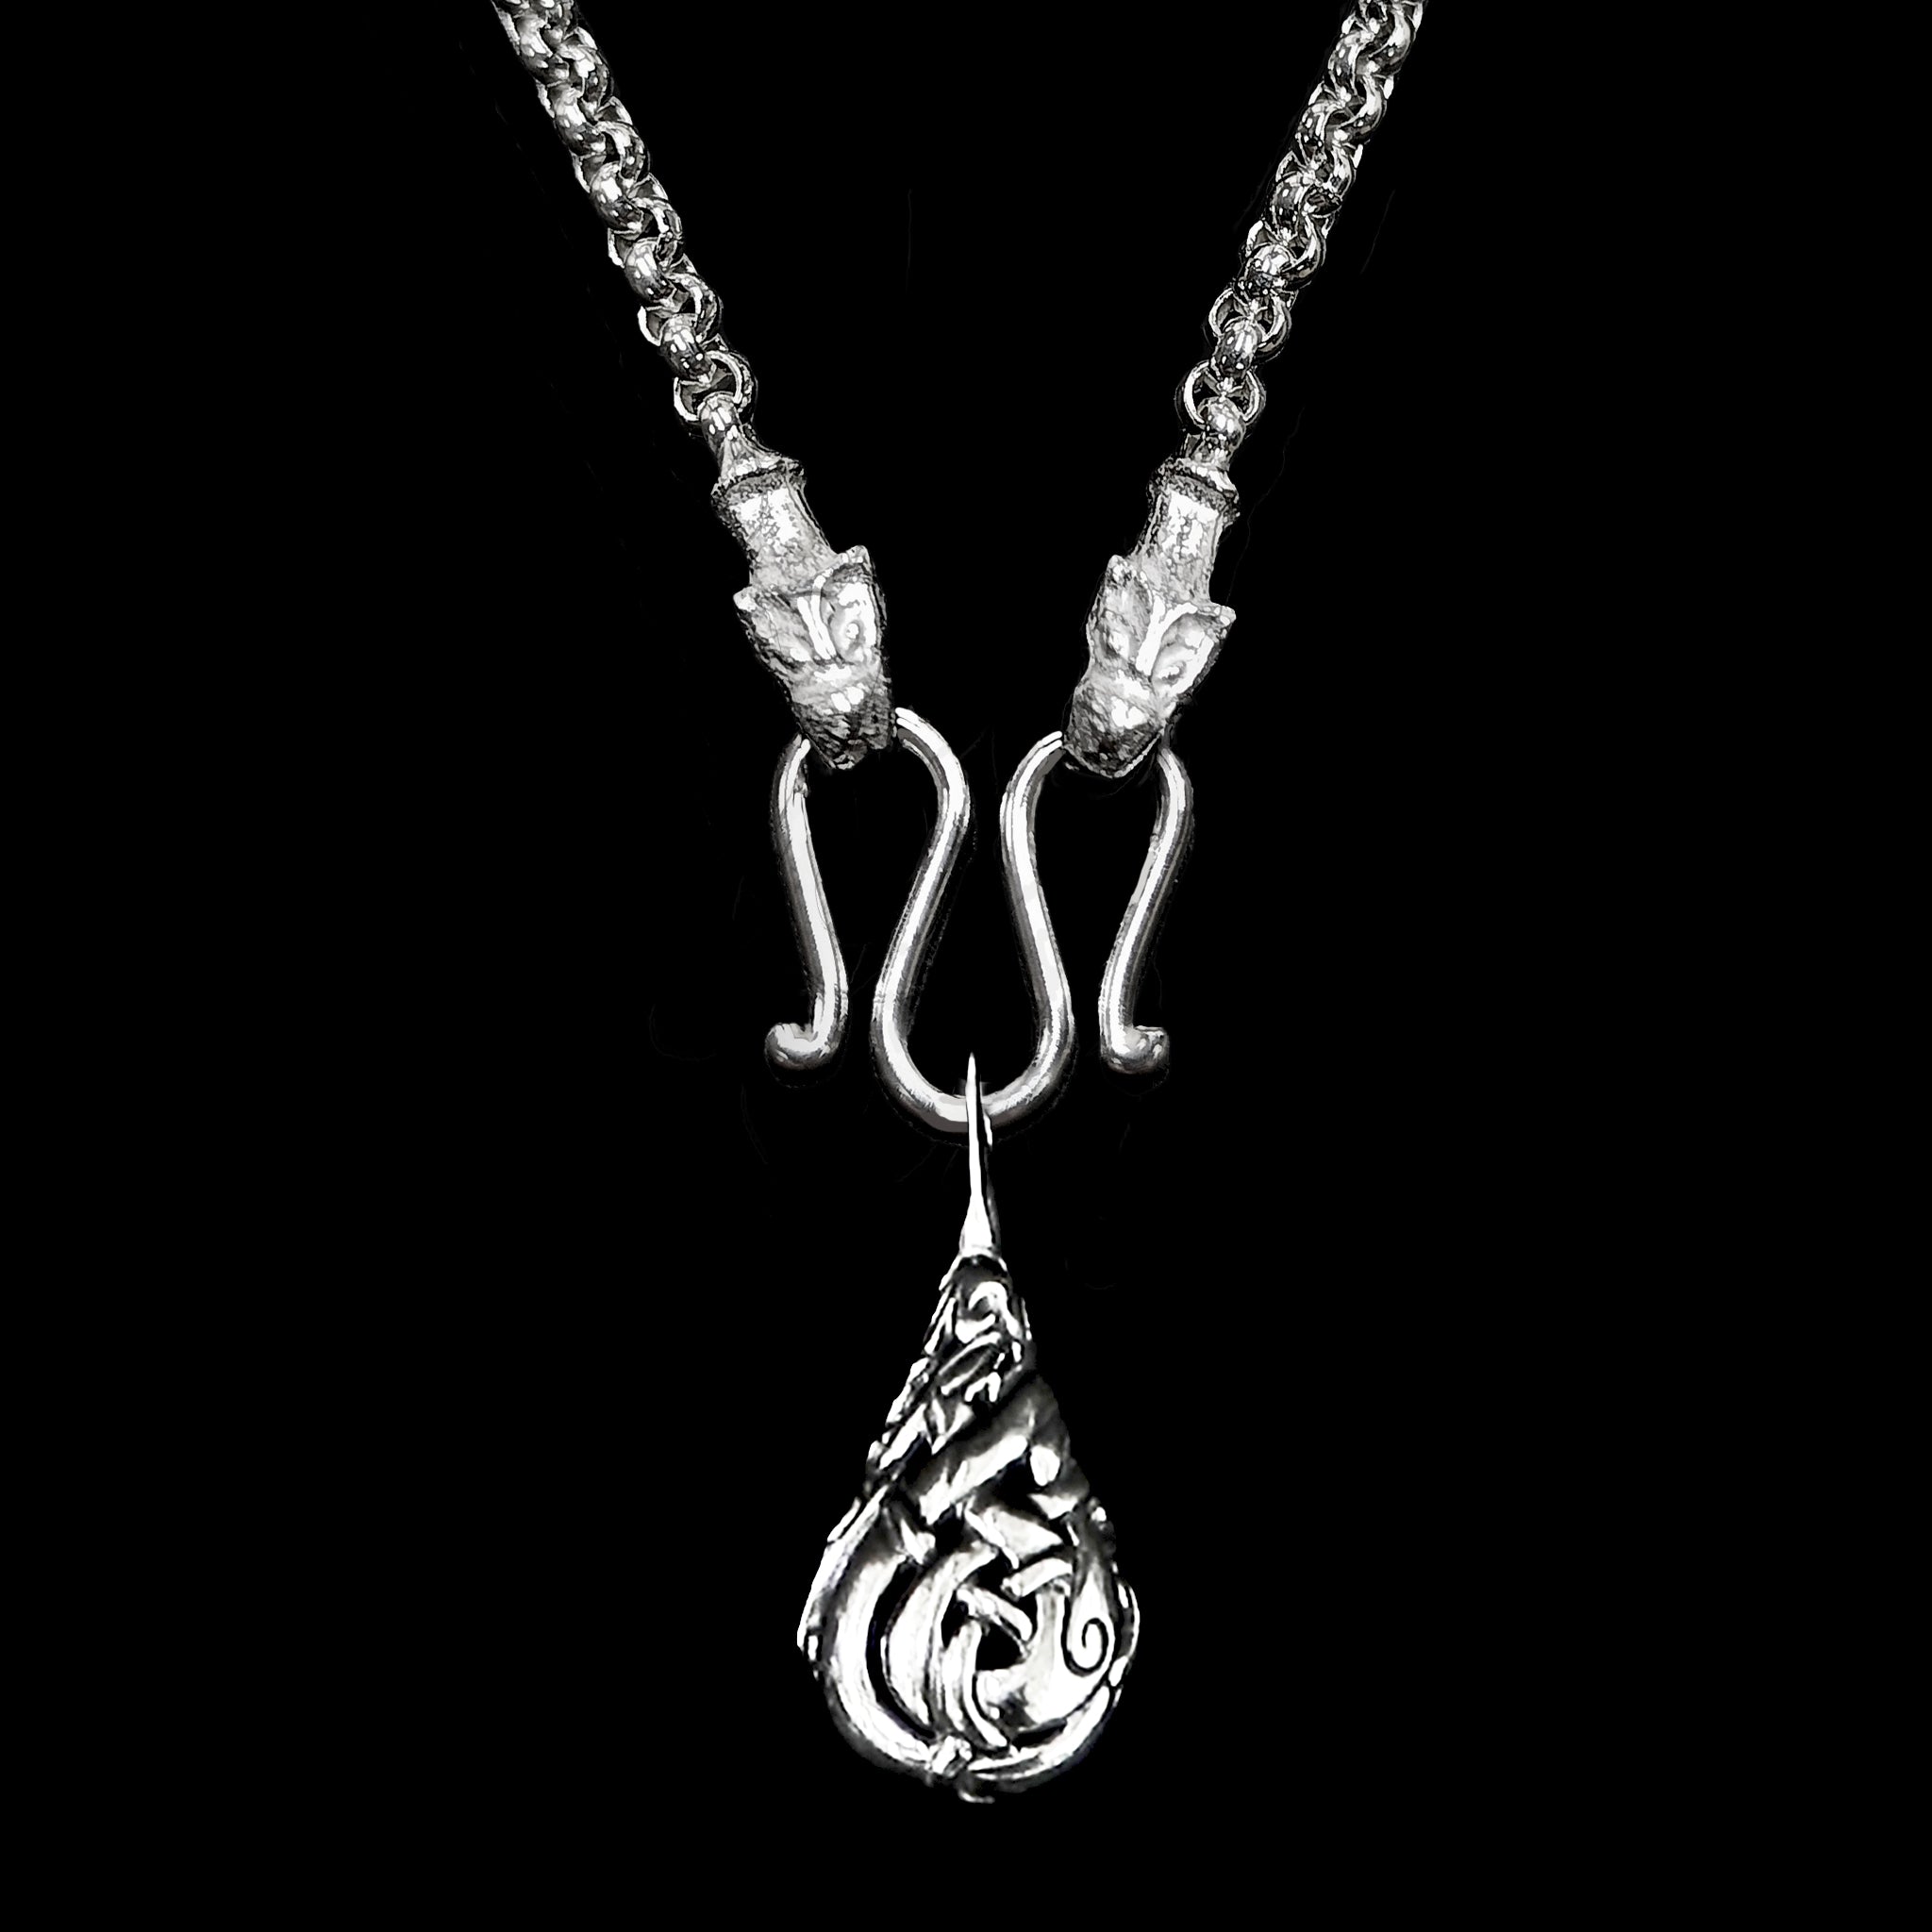 Slim Silver Anchor Chain Pendant Necklace with Icelandic Wolf Heads with Urnes Lovers Teardrop Viking Pendant